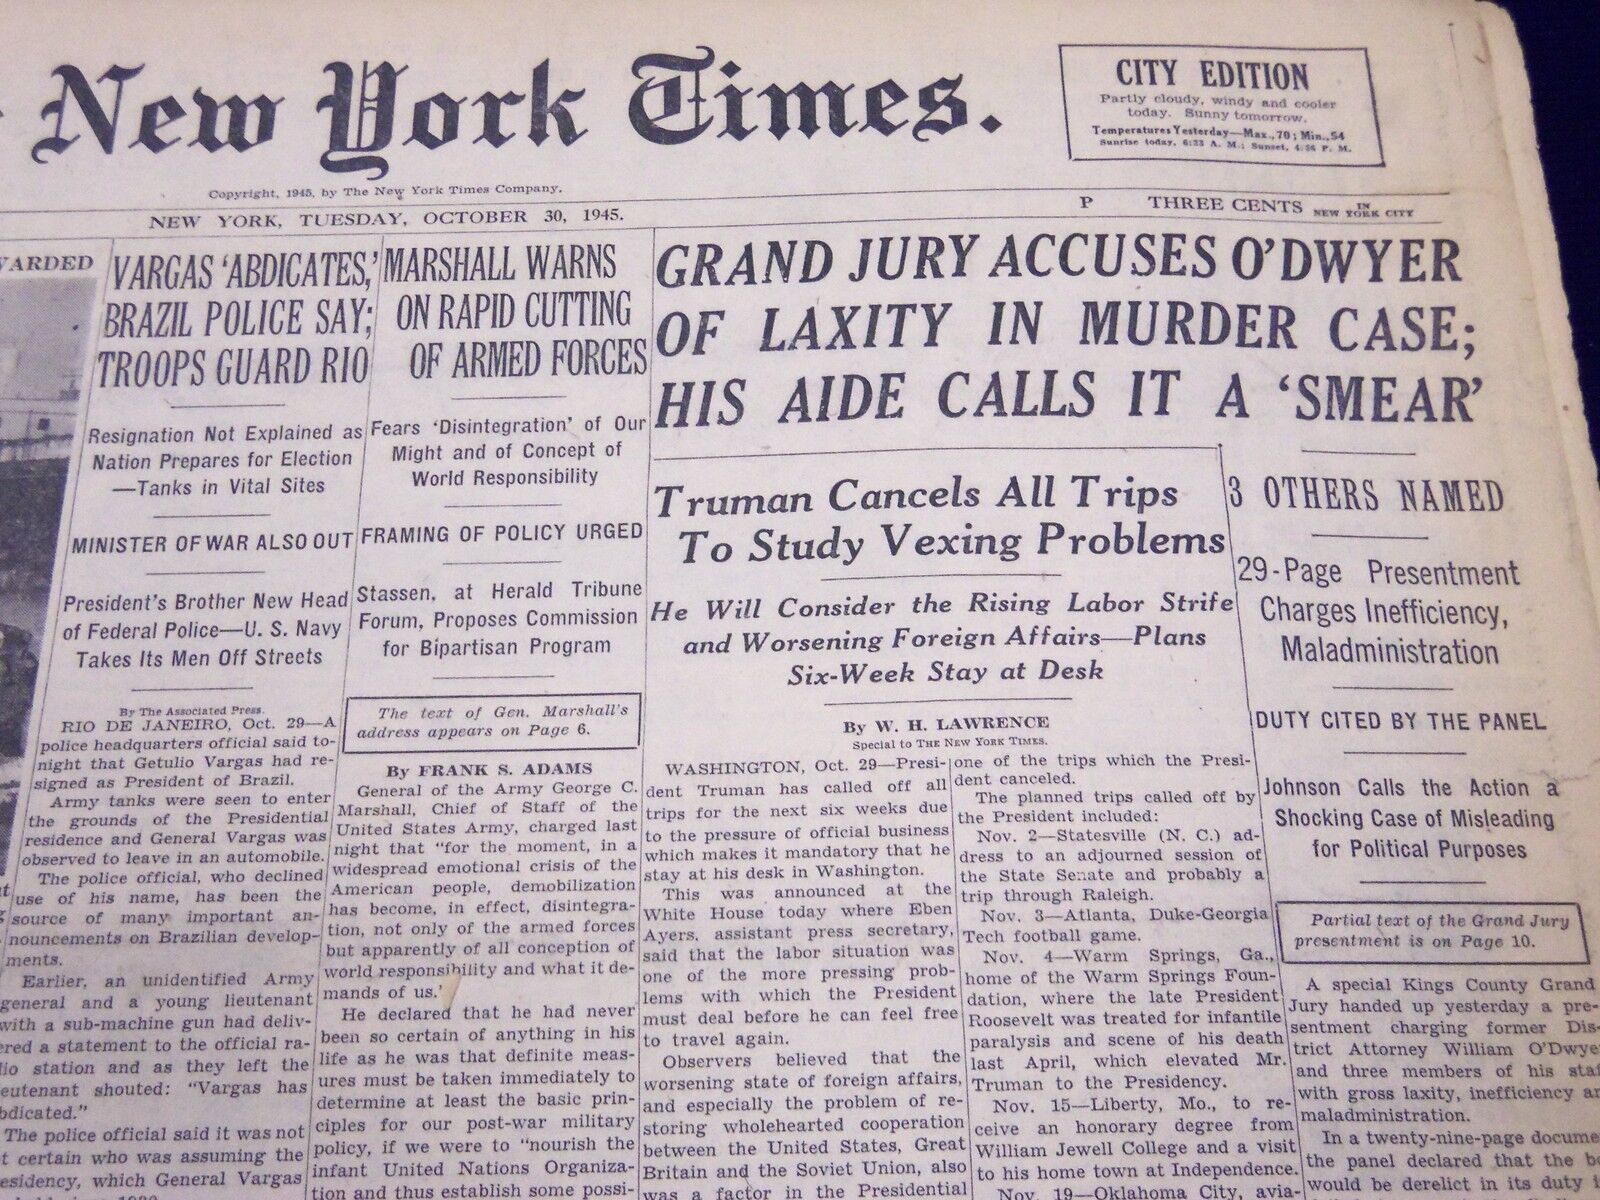 1945 OCT 30 NEW YORK TIMES GRAND JURY ACCUSES O'DWYER OF LAXITY IN CASE - NT 258